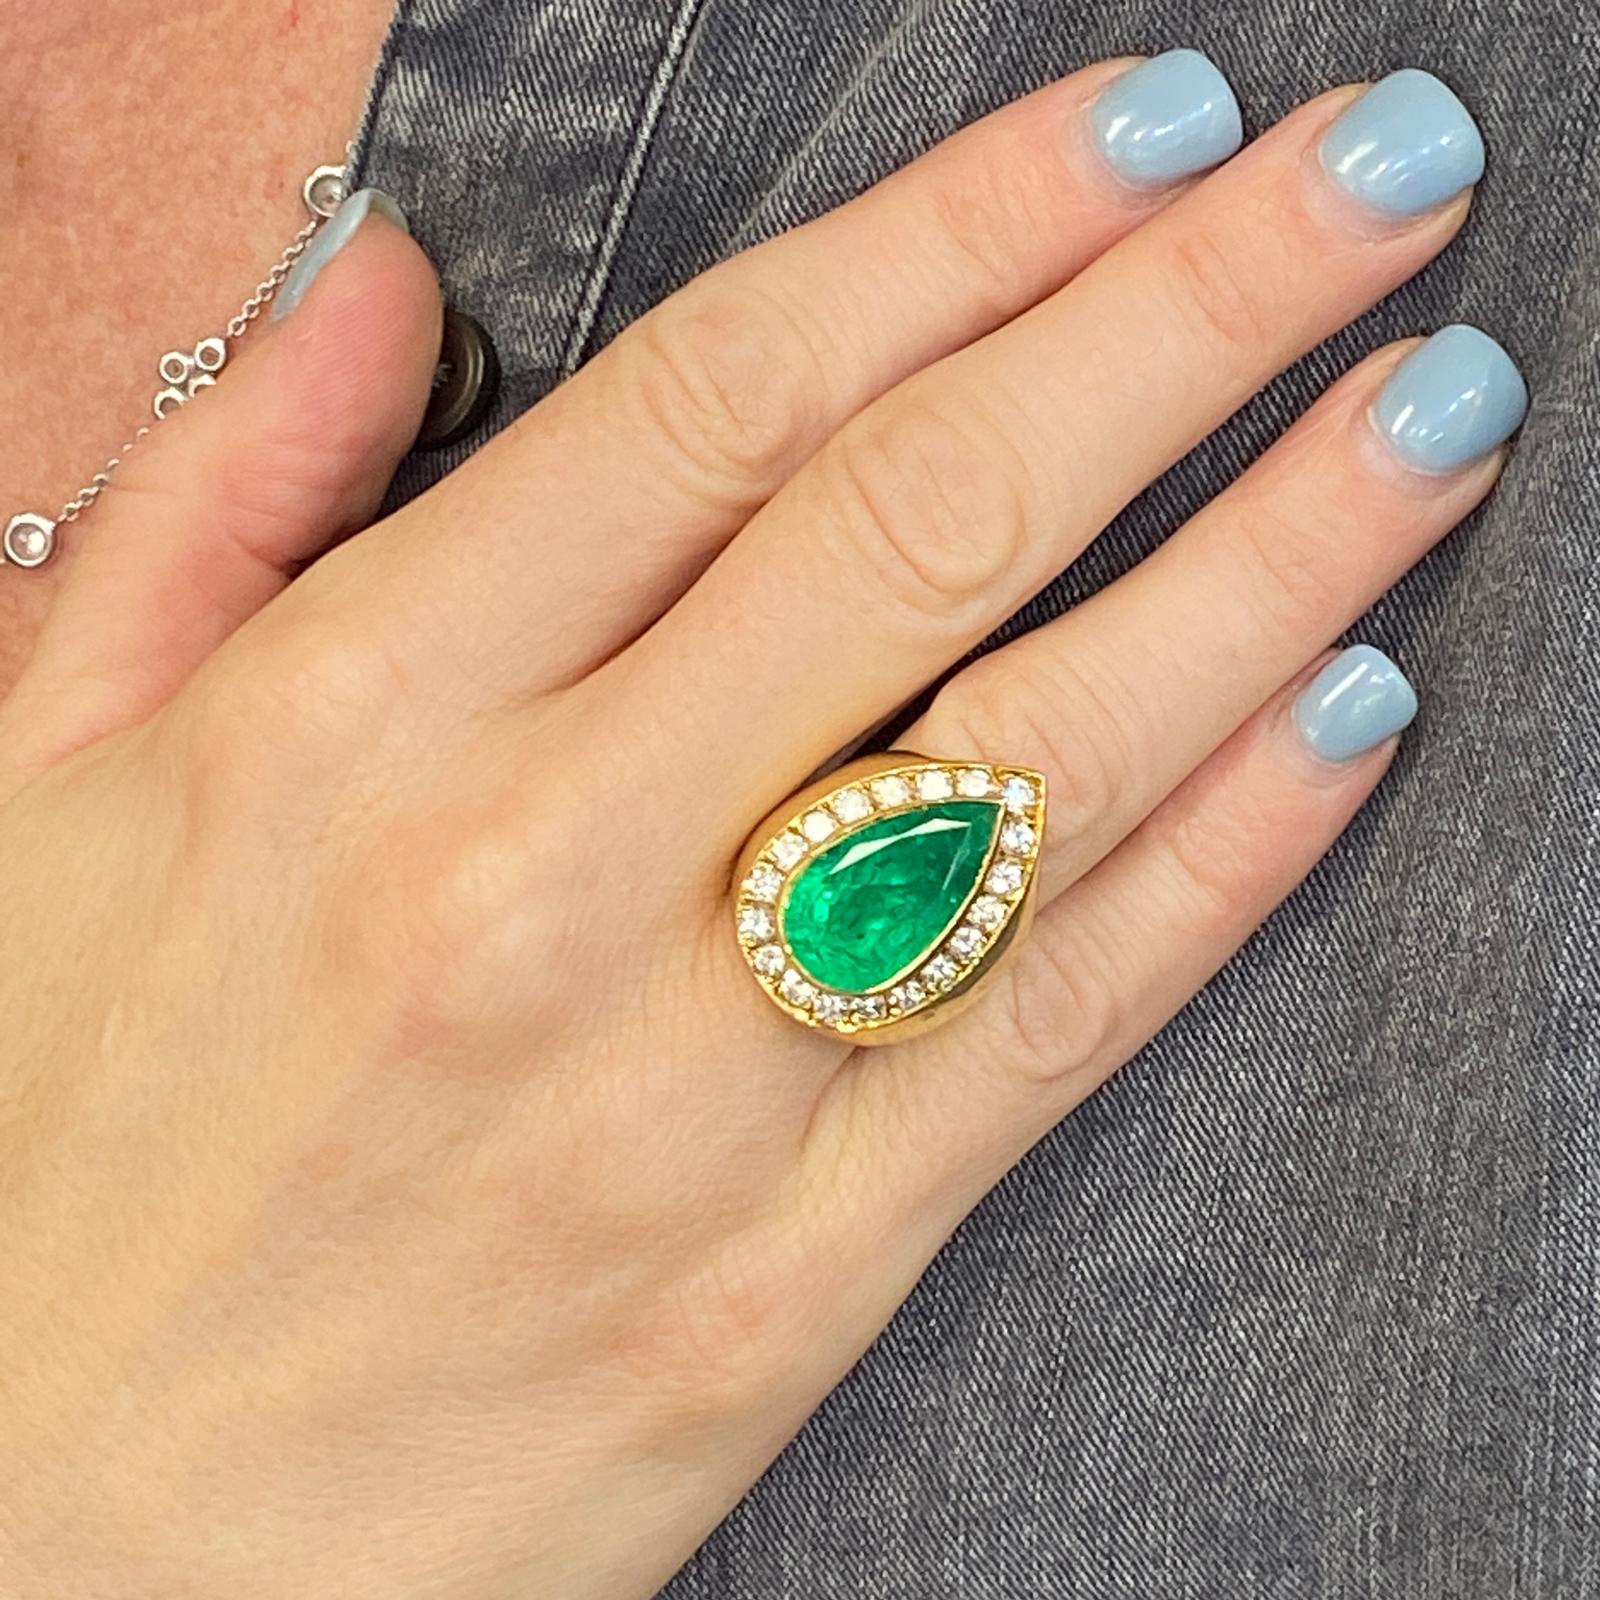 Fabulous Colombian emerald diamond cocktail ring hand crafted in 18 karat yellow gold. The 8.50 carat Colombian Emerald is certified by the AGL. The emerald is surrounded by 19 round brilliant cut diamonds weighing 1.70 carat total weight and graded